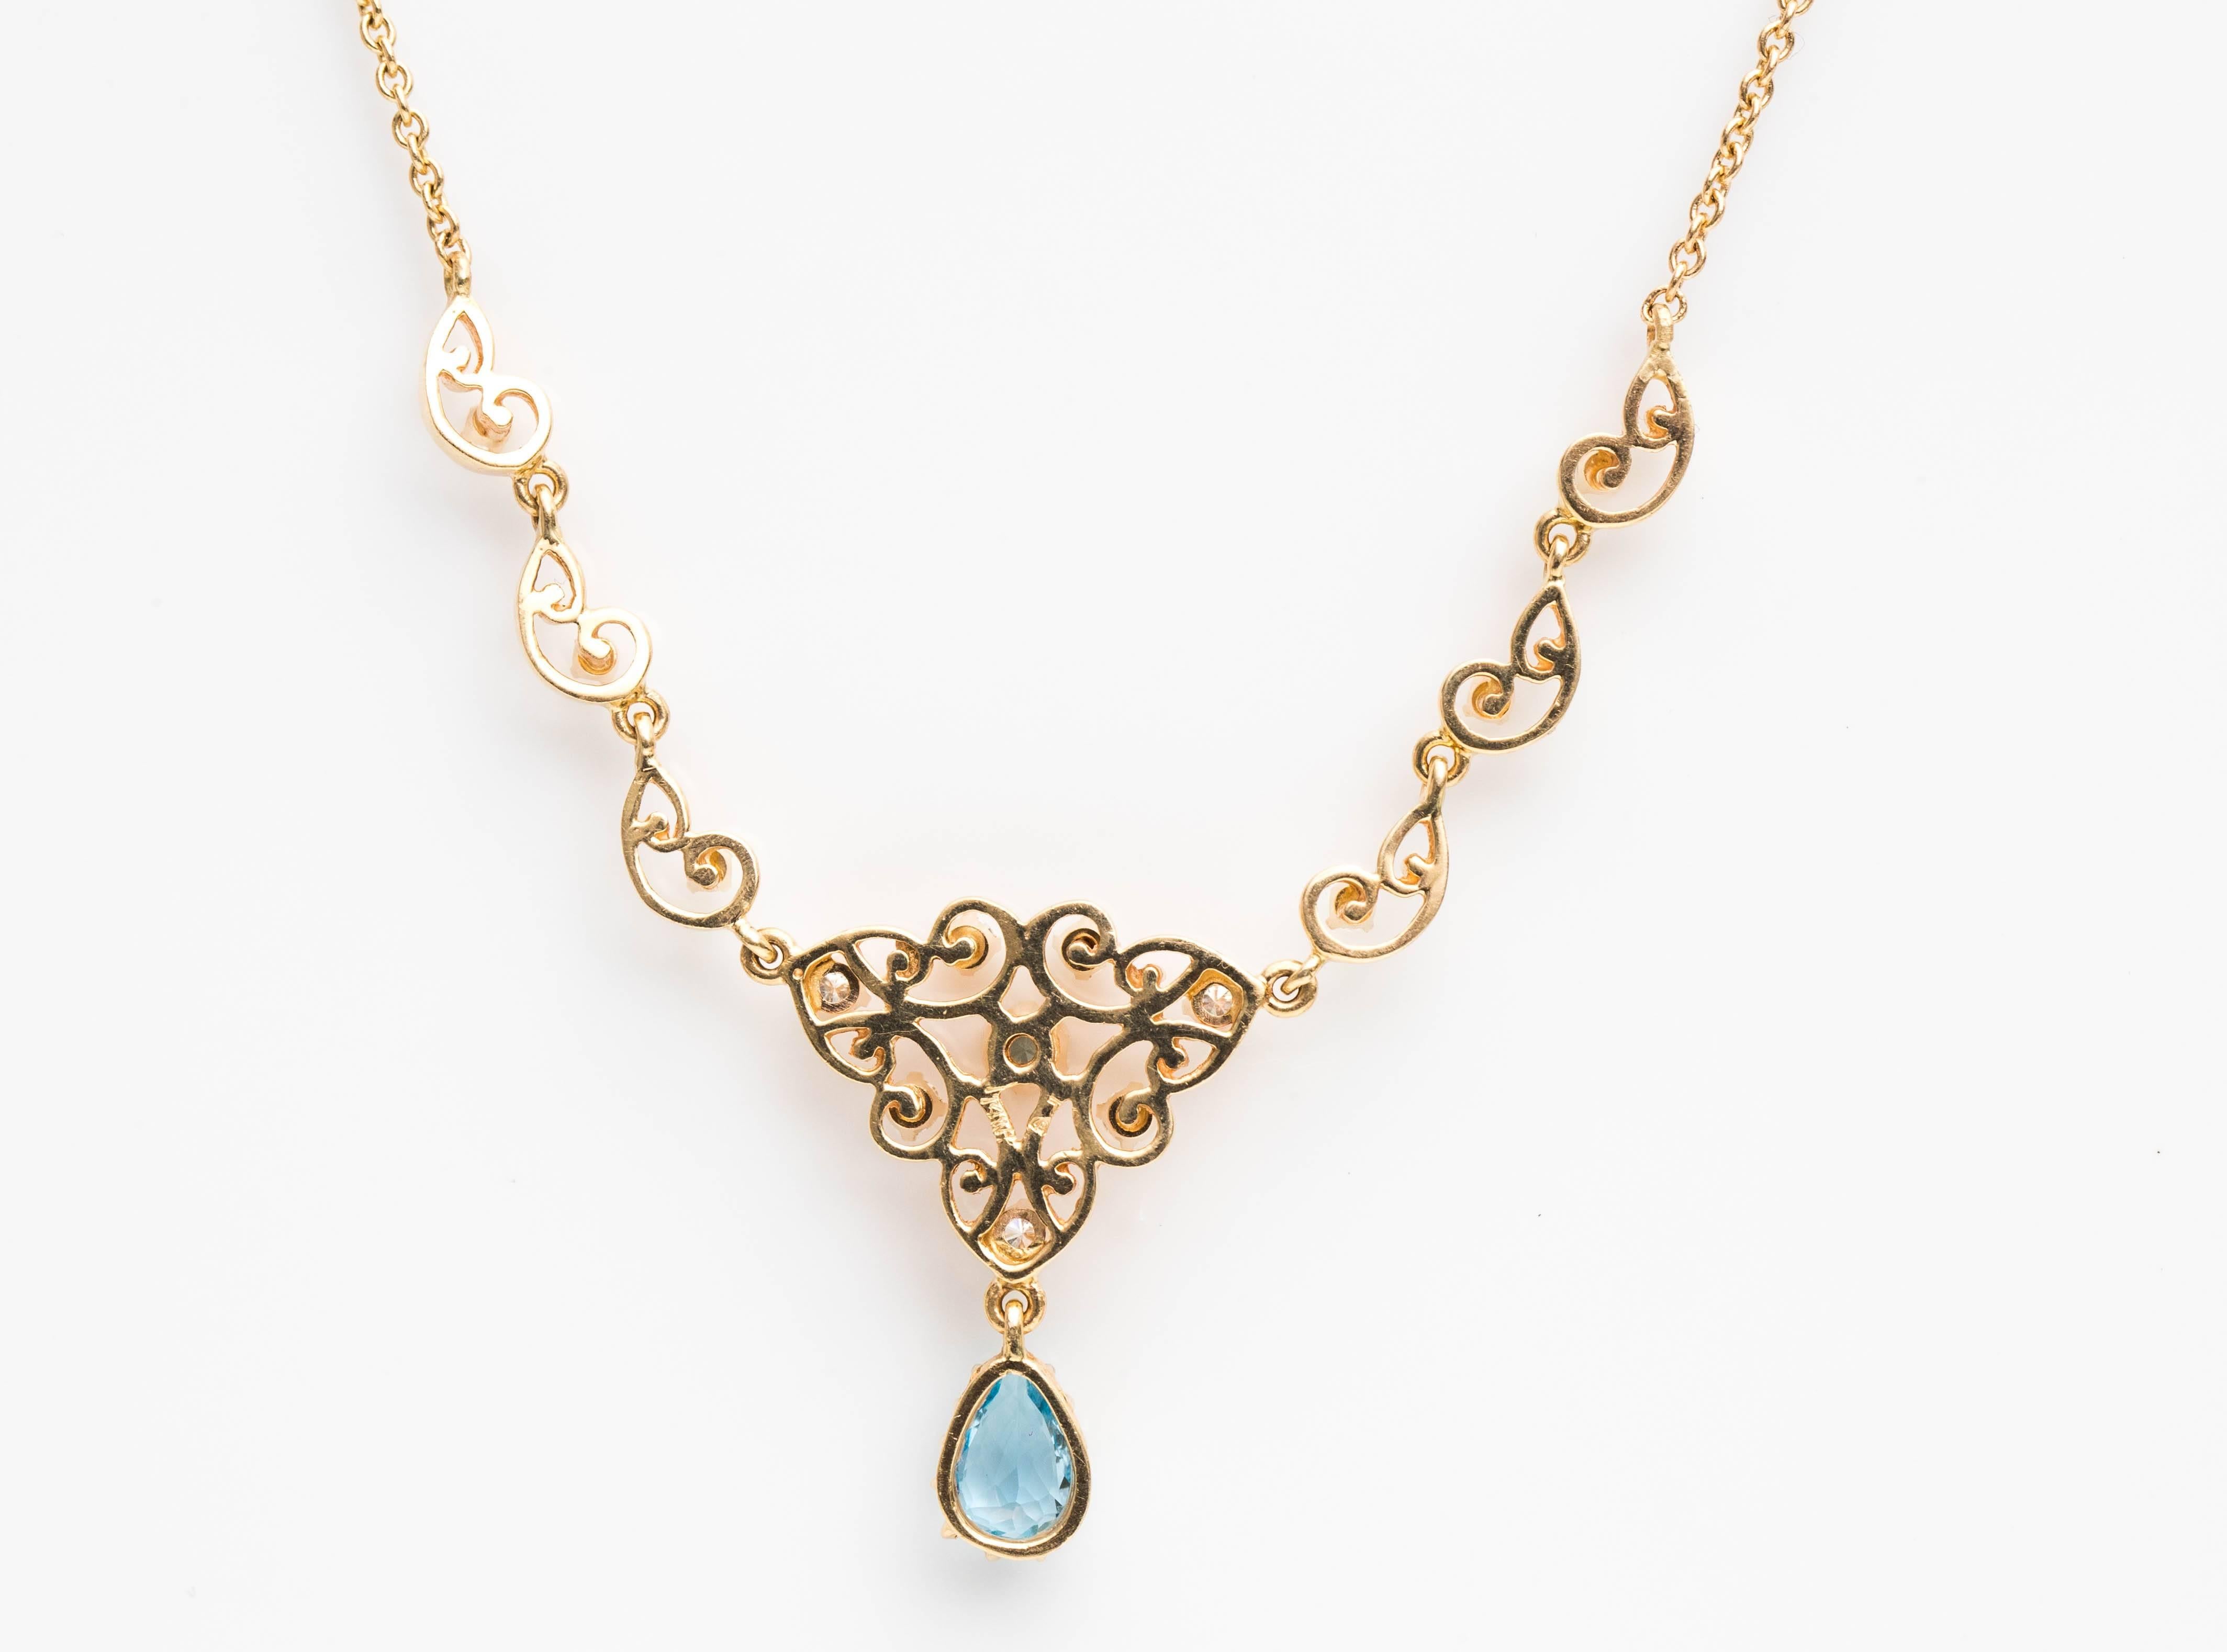 12gm gold necklace